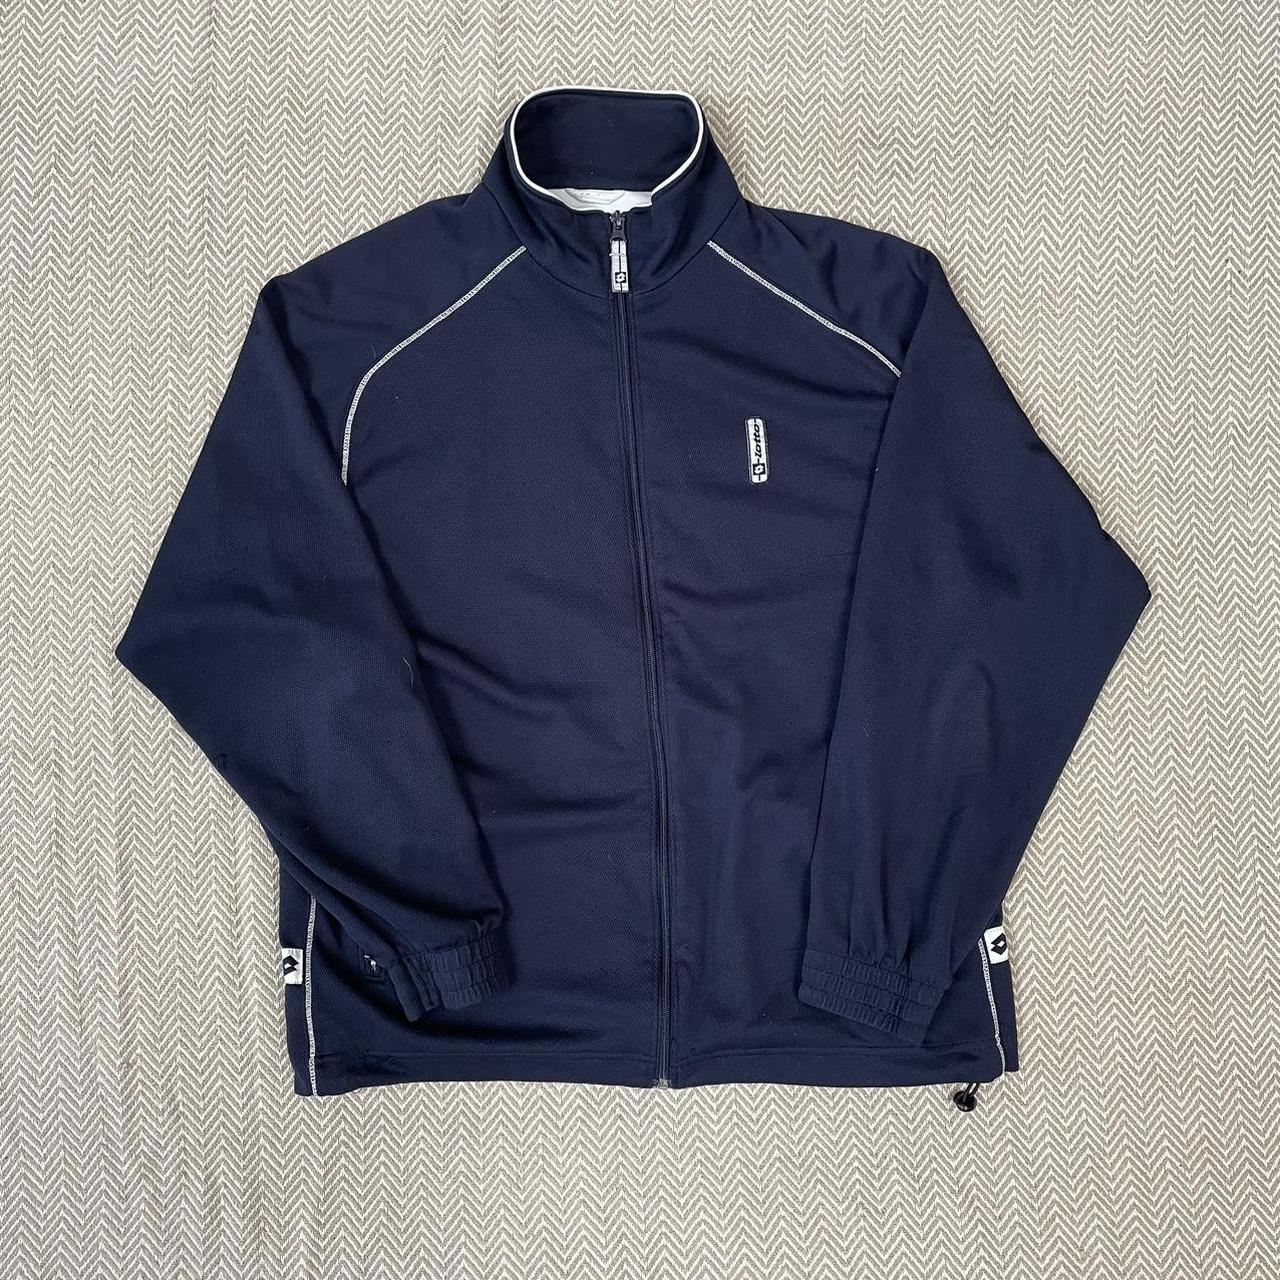 Navy Lotto Zip Up Jacket Size: Small Pit to Pit: 21”... - Depop